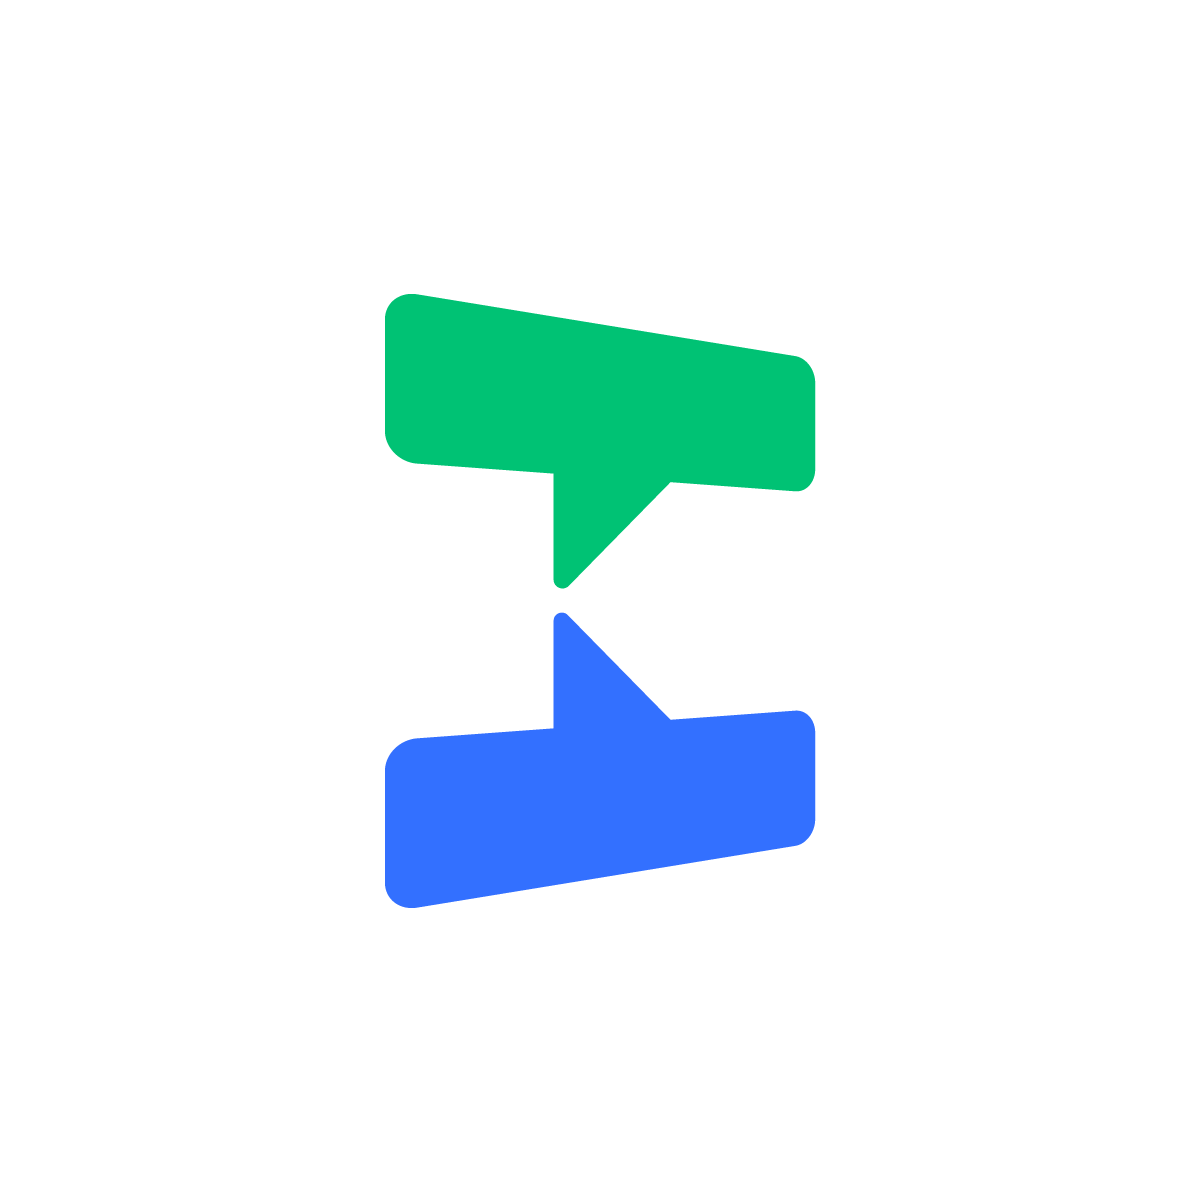 Creative logo with mirrored chat bubbles forming a negative space letter 'K,' suitable for communication, chat apps, and connections.